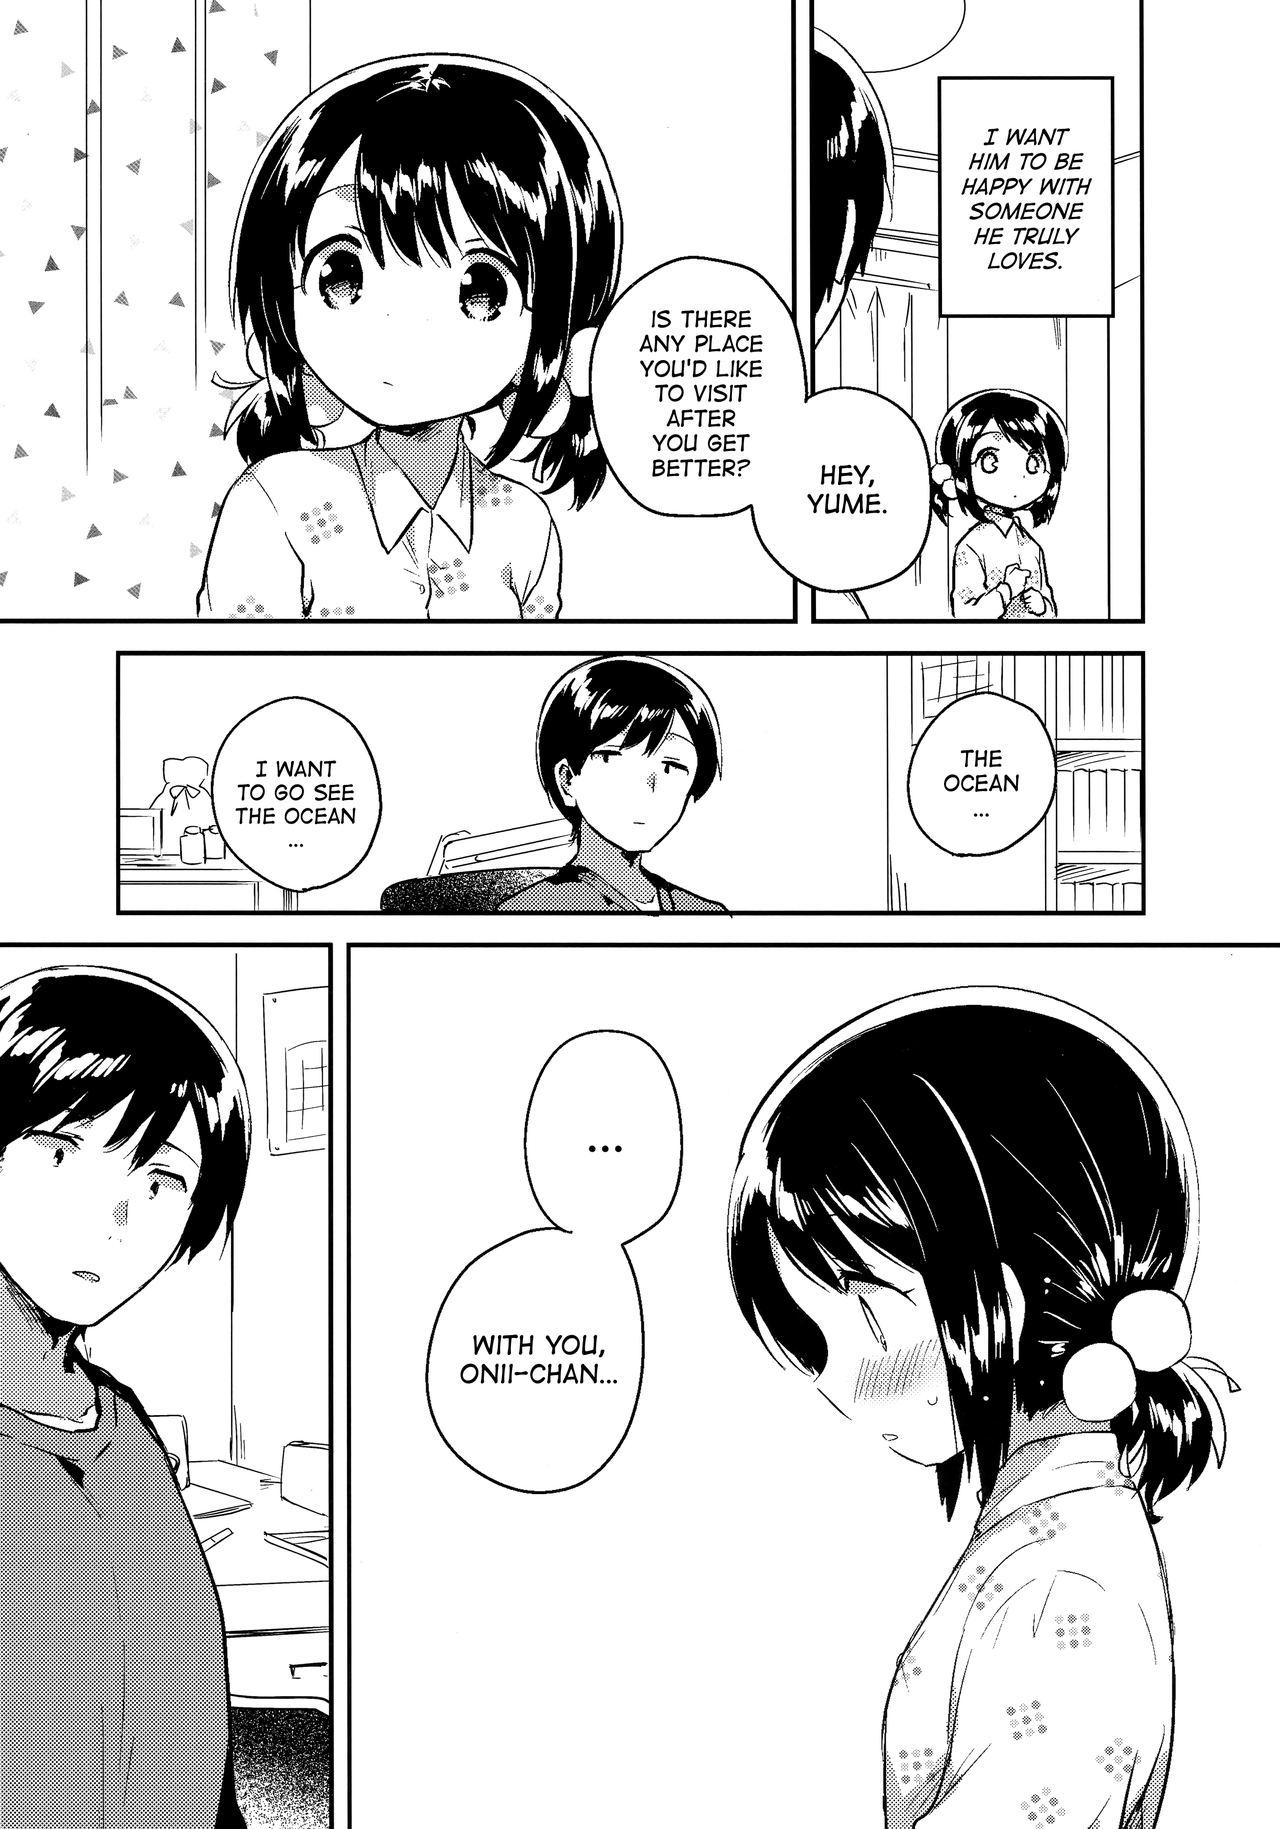 Arabic Imouto wa Sickness no Omake | My Little Sister is Sickly: Extra Story Muscles - Page 7